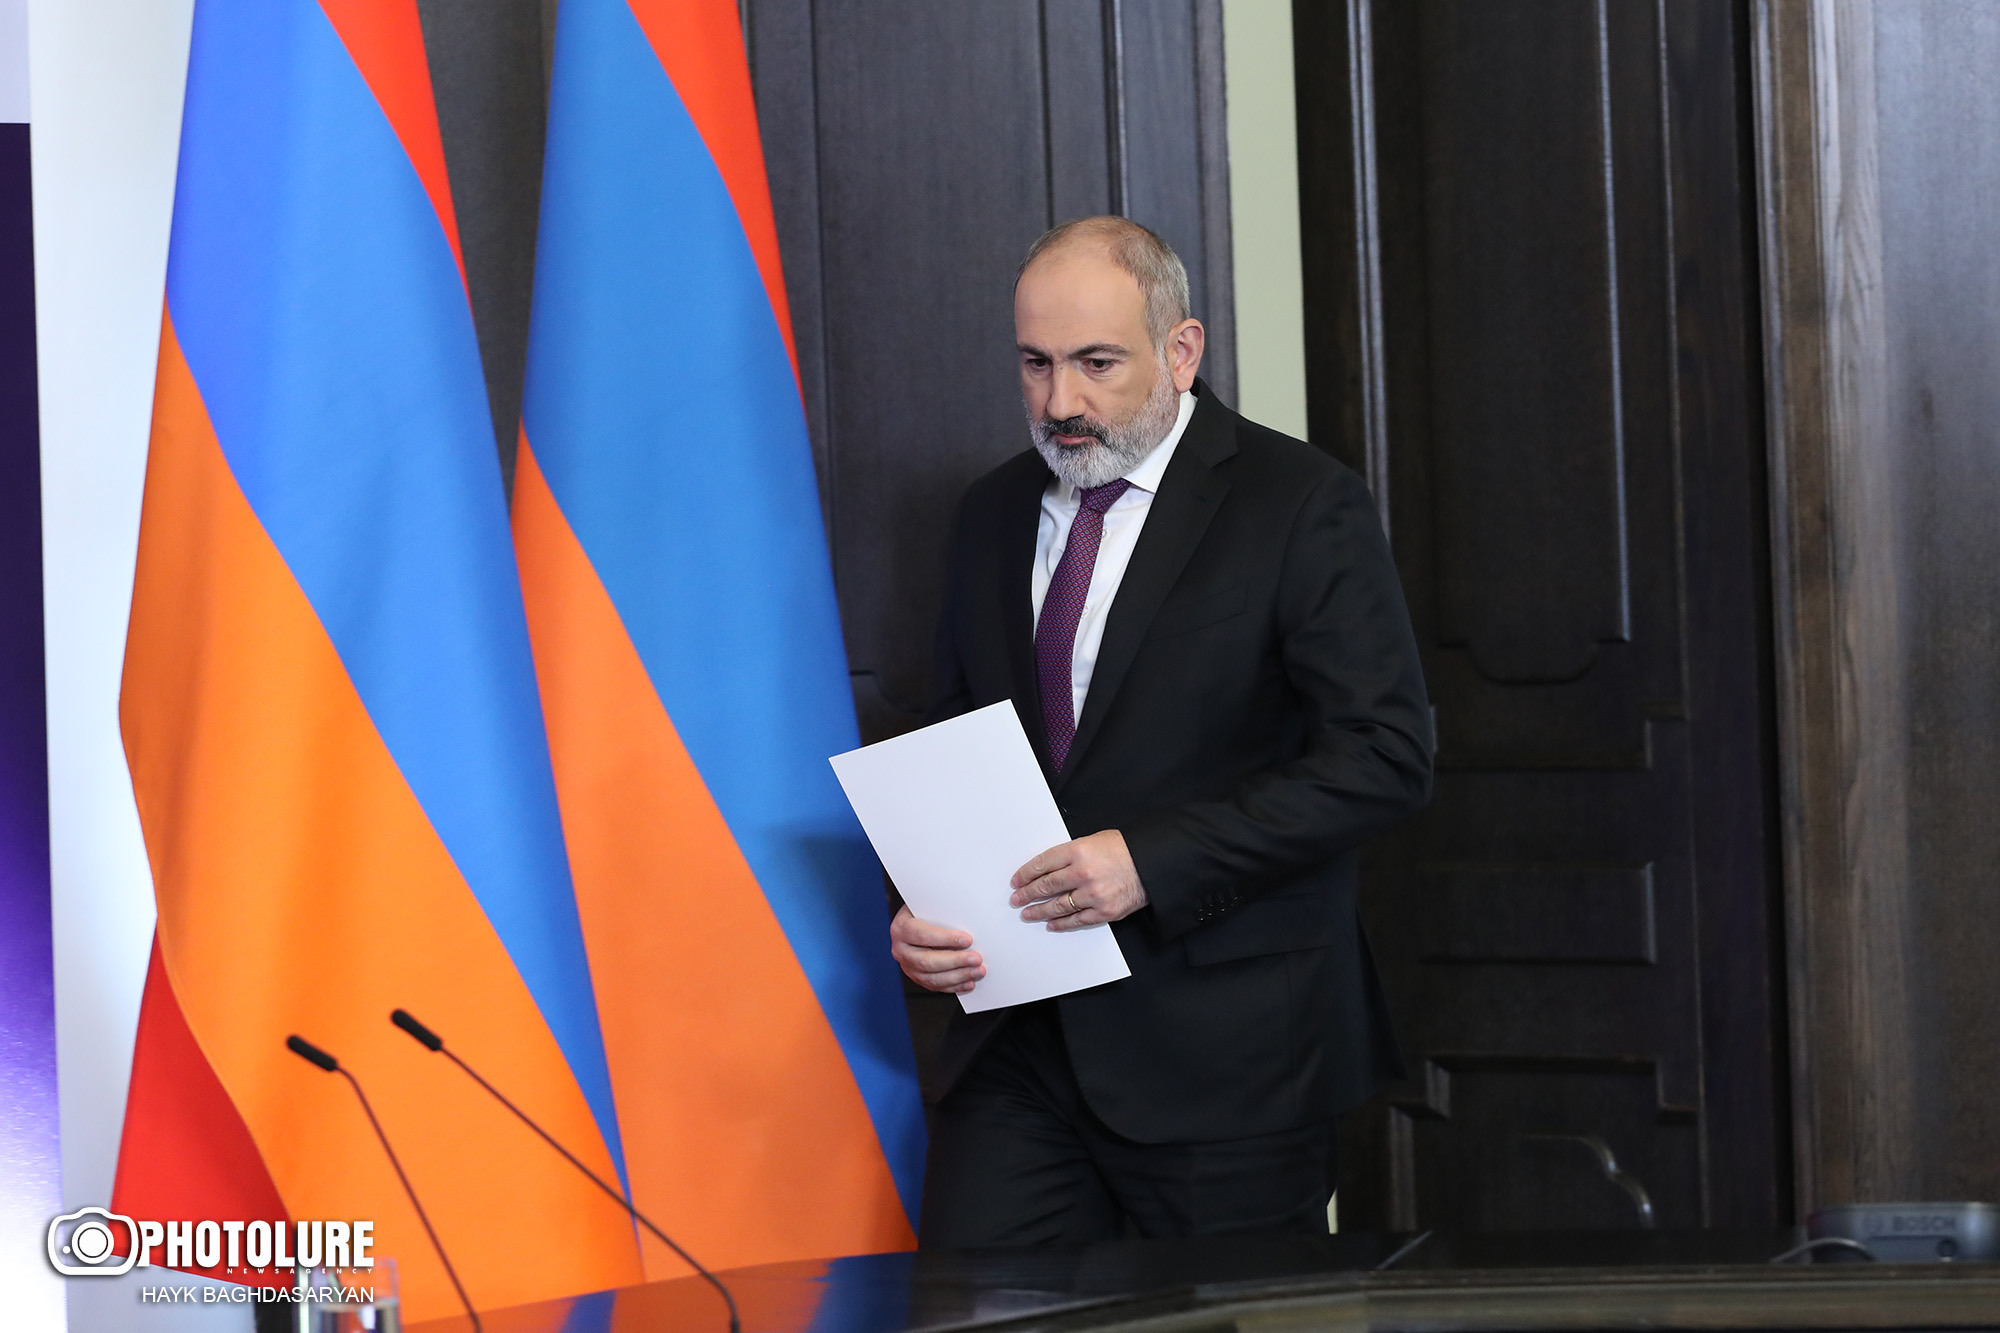 Opinion: Nikol Pashinyan does not have a mandate to hand over Artsakh to Azerbaijan